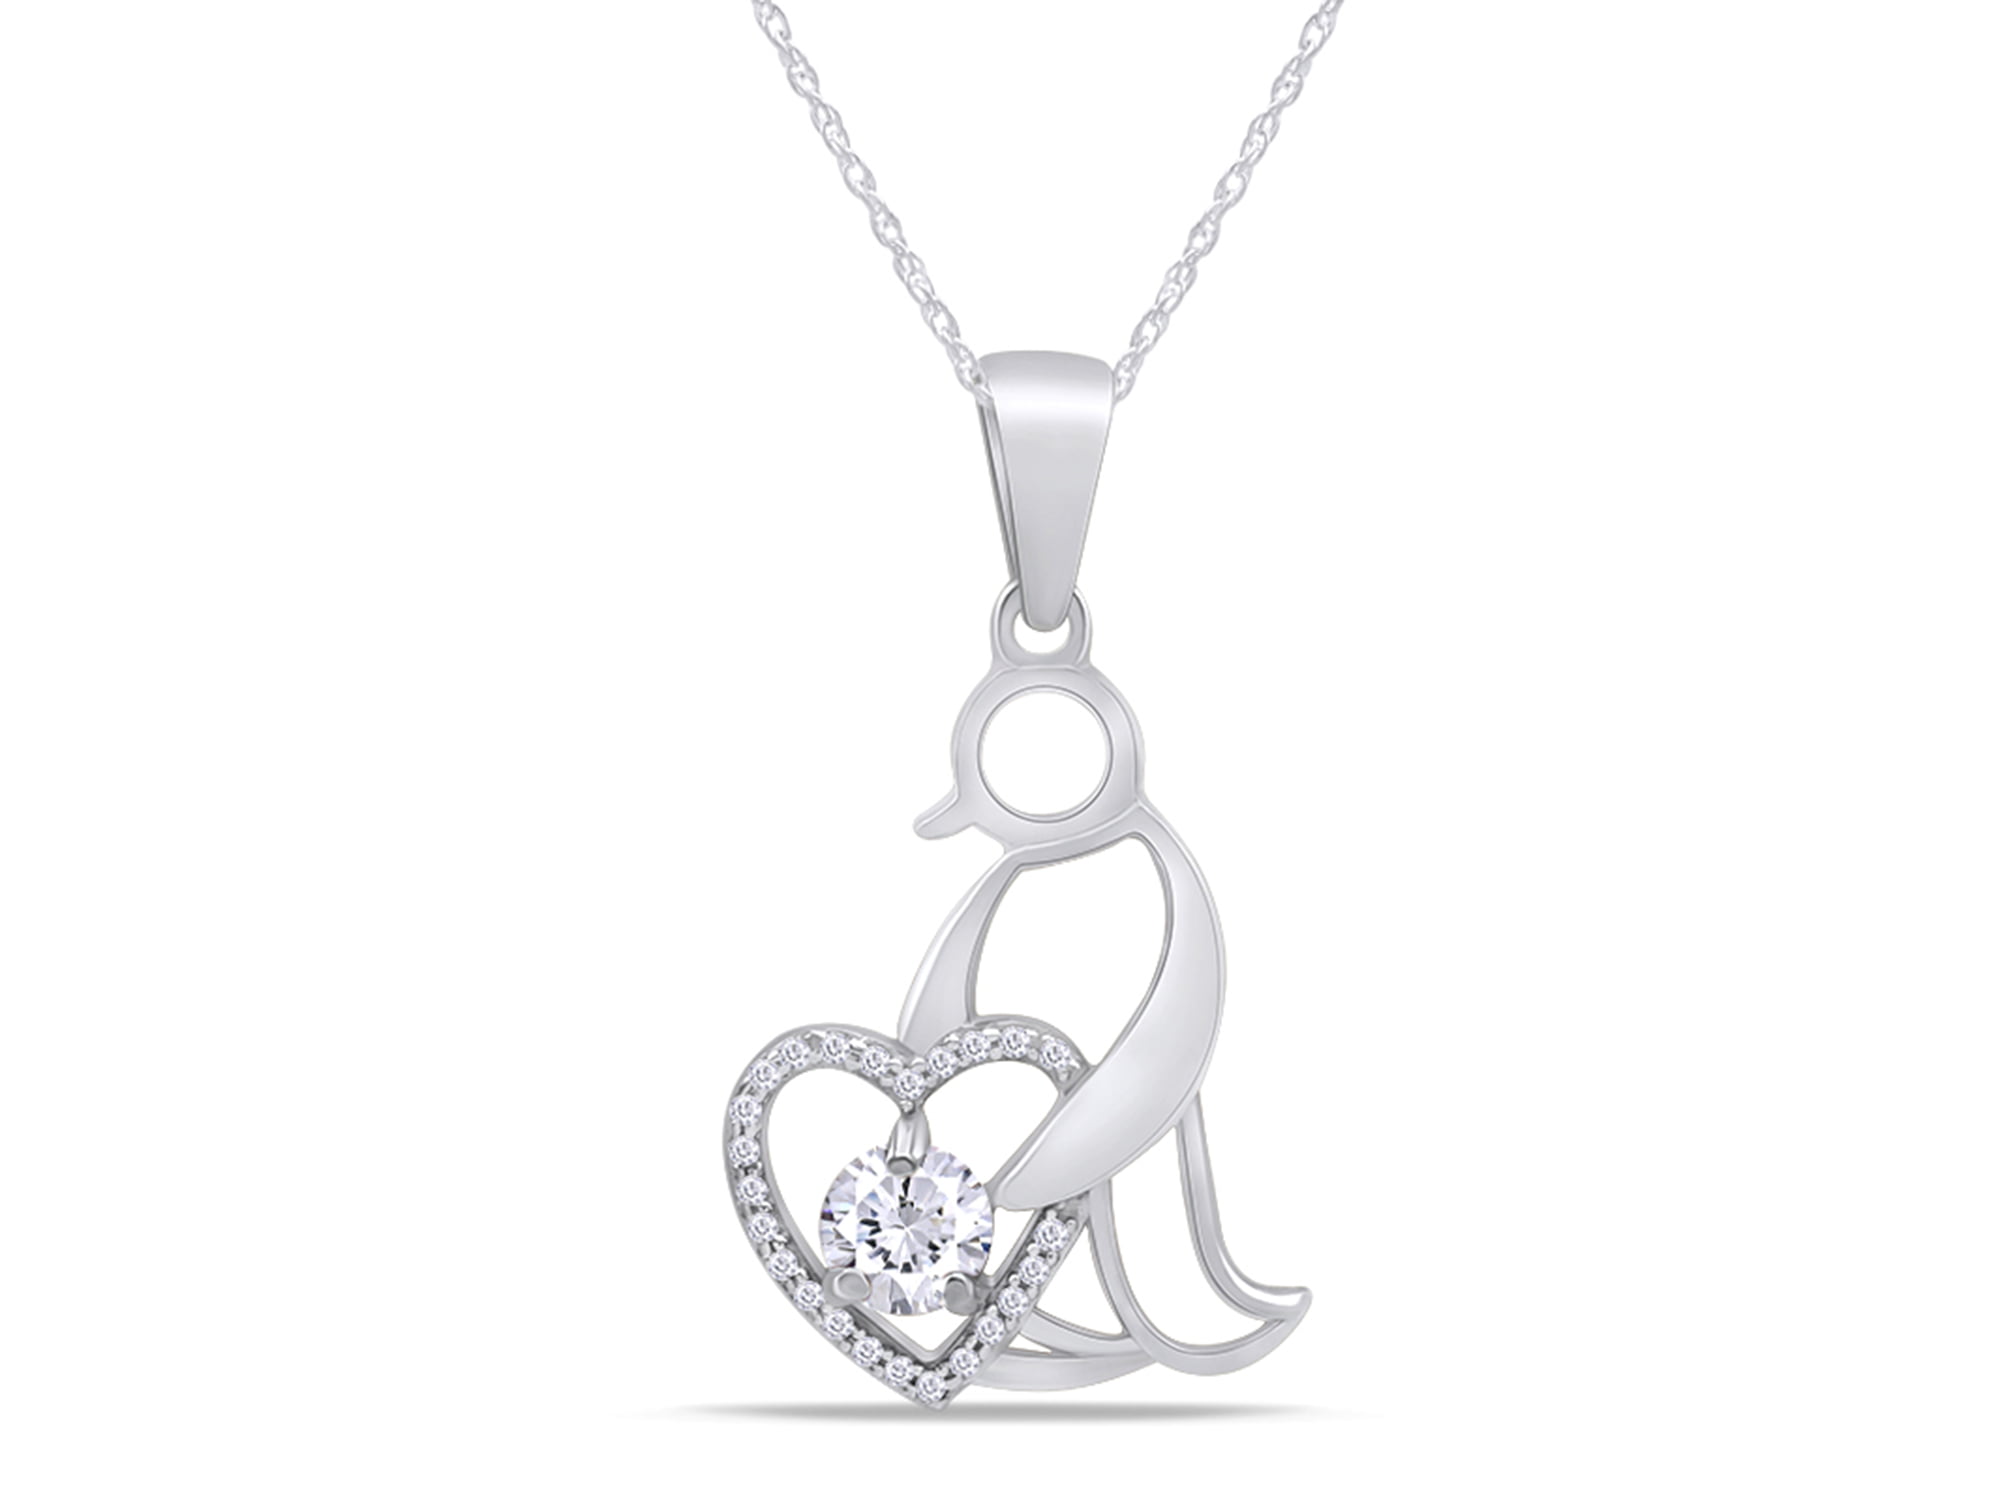 Wishrocks Round Cut White Cubic Zirconia Cross with Heart Pendant Necklace in 14K White Gold Over Sterling Silver 